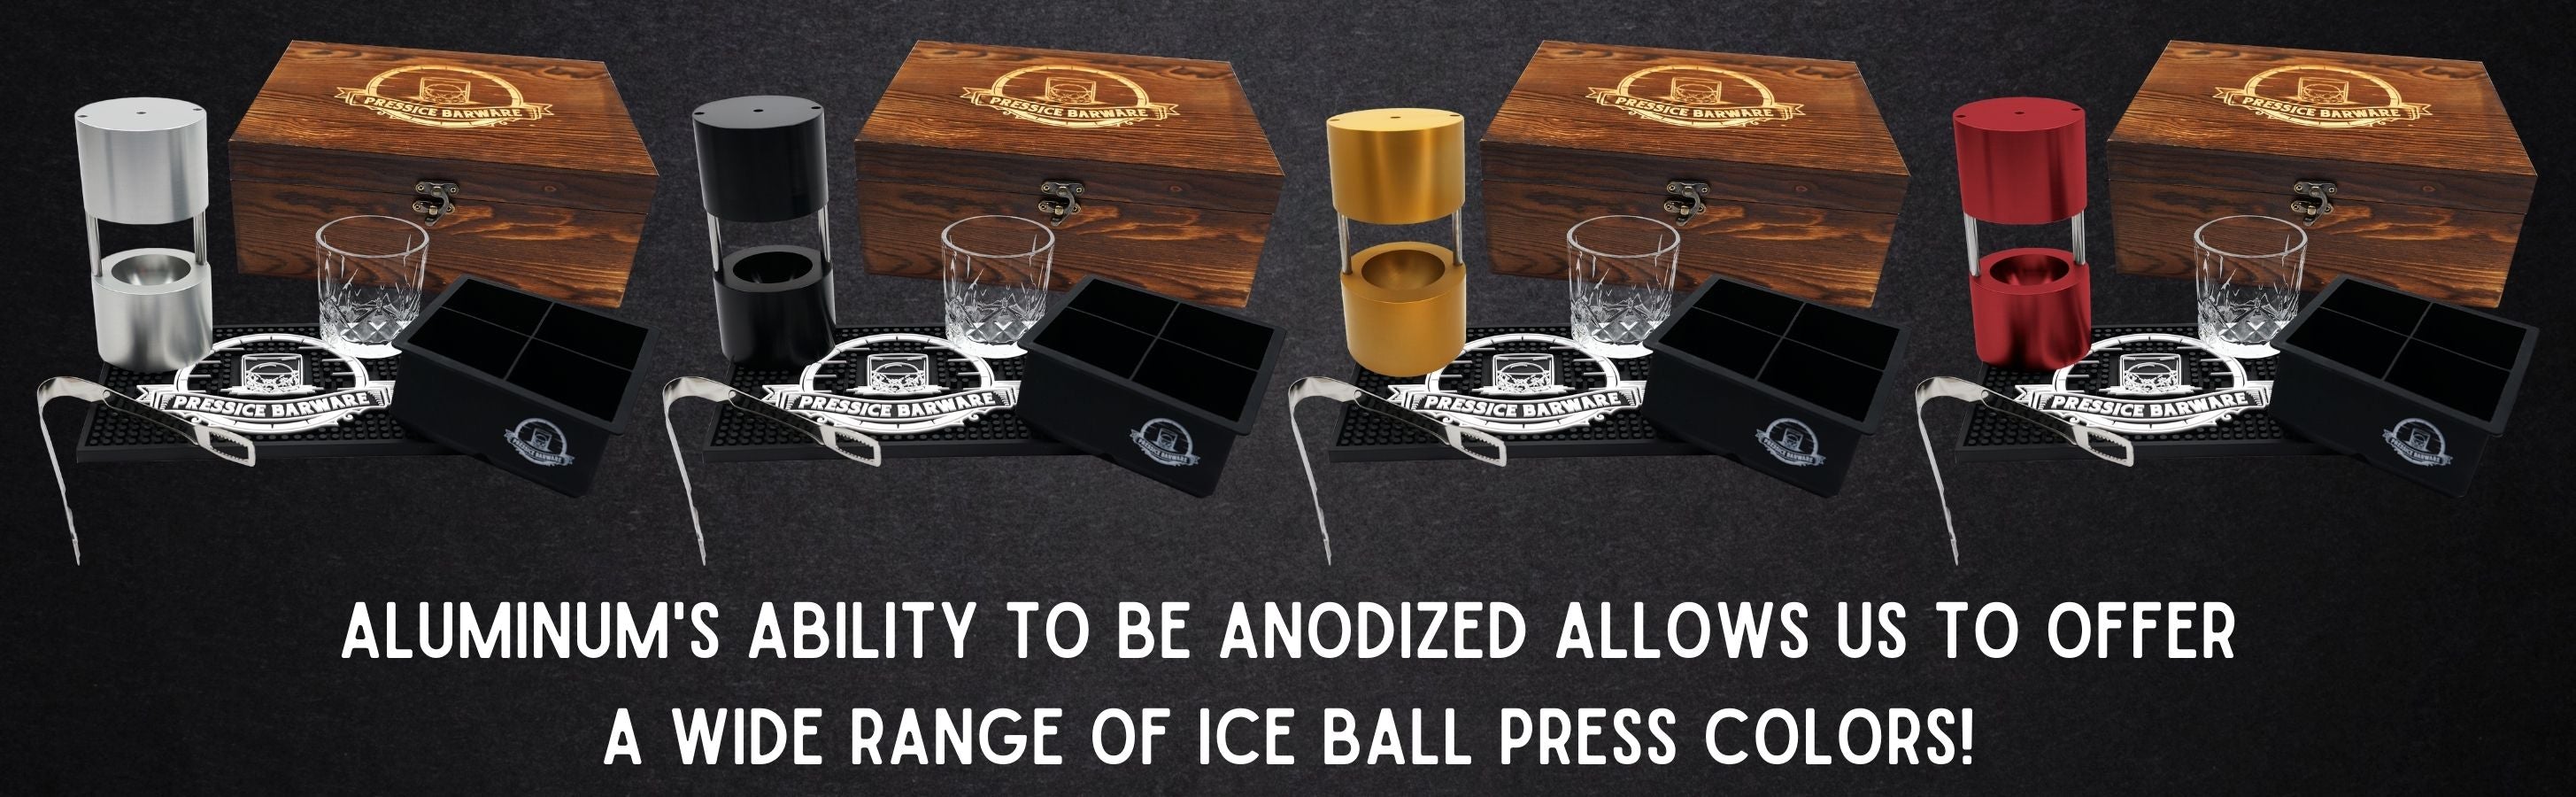 Pressice Barware Ice Ball Press - Perfect Spheres in Less Than a Minute -  Includes Anodized Aluminum Ice Press, Drip Tray and Ice Mold - Made in the